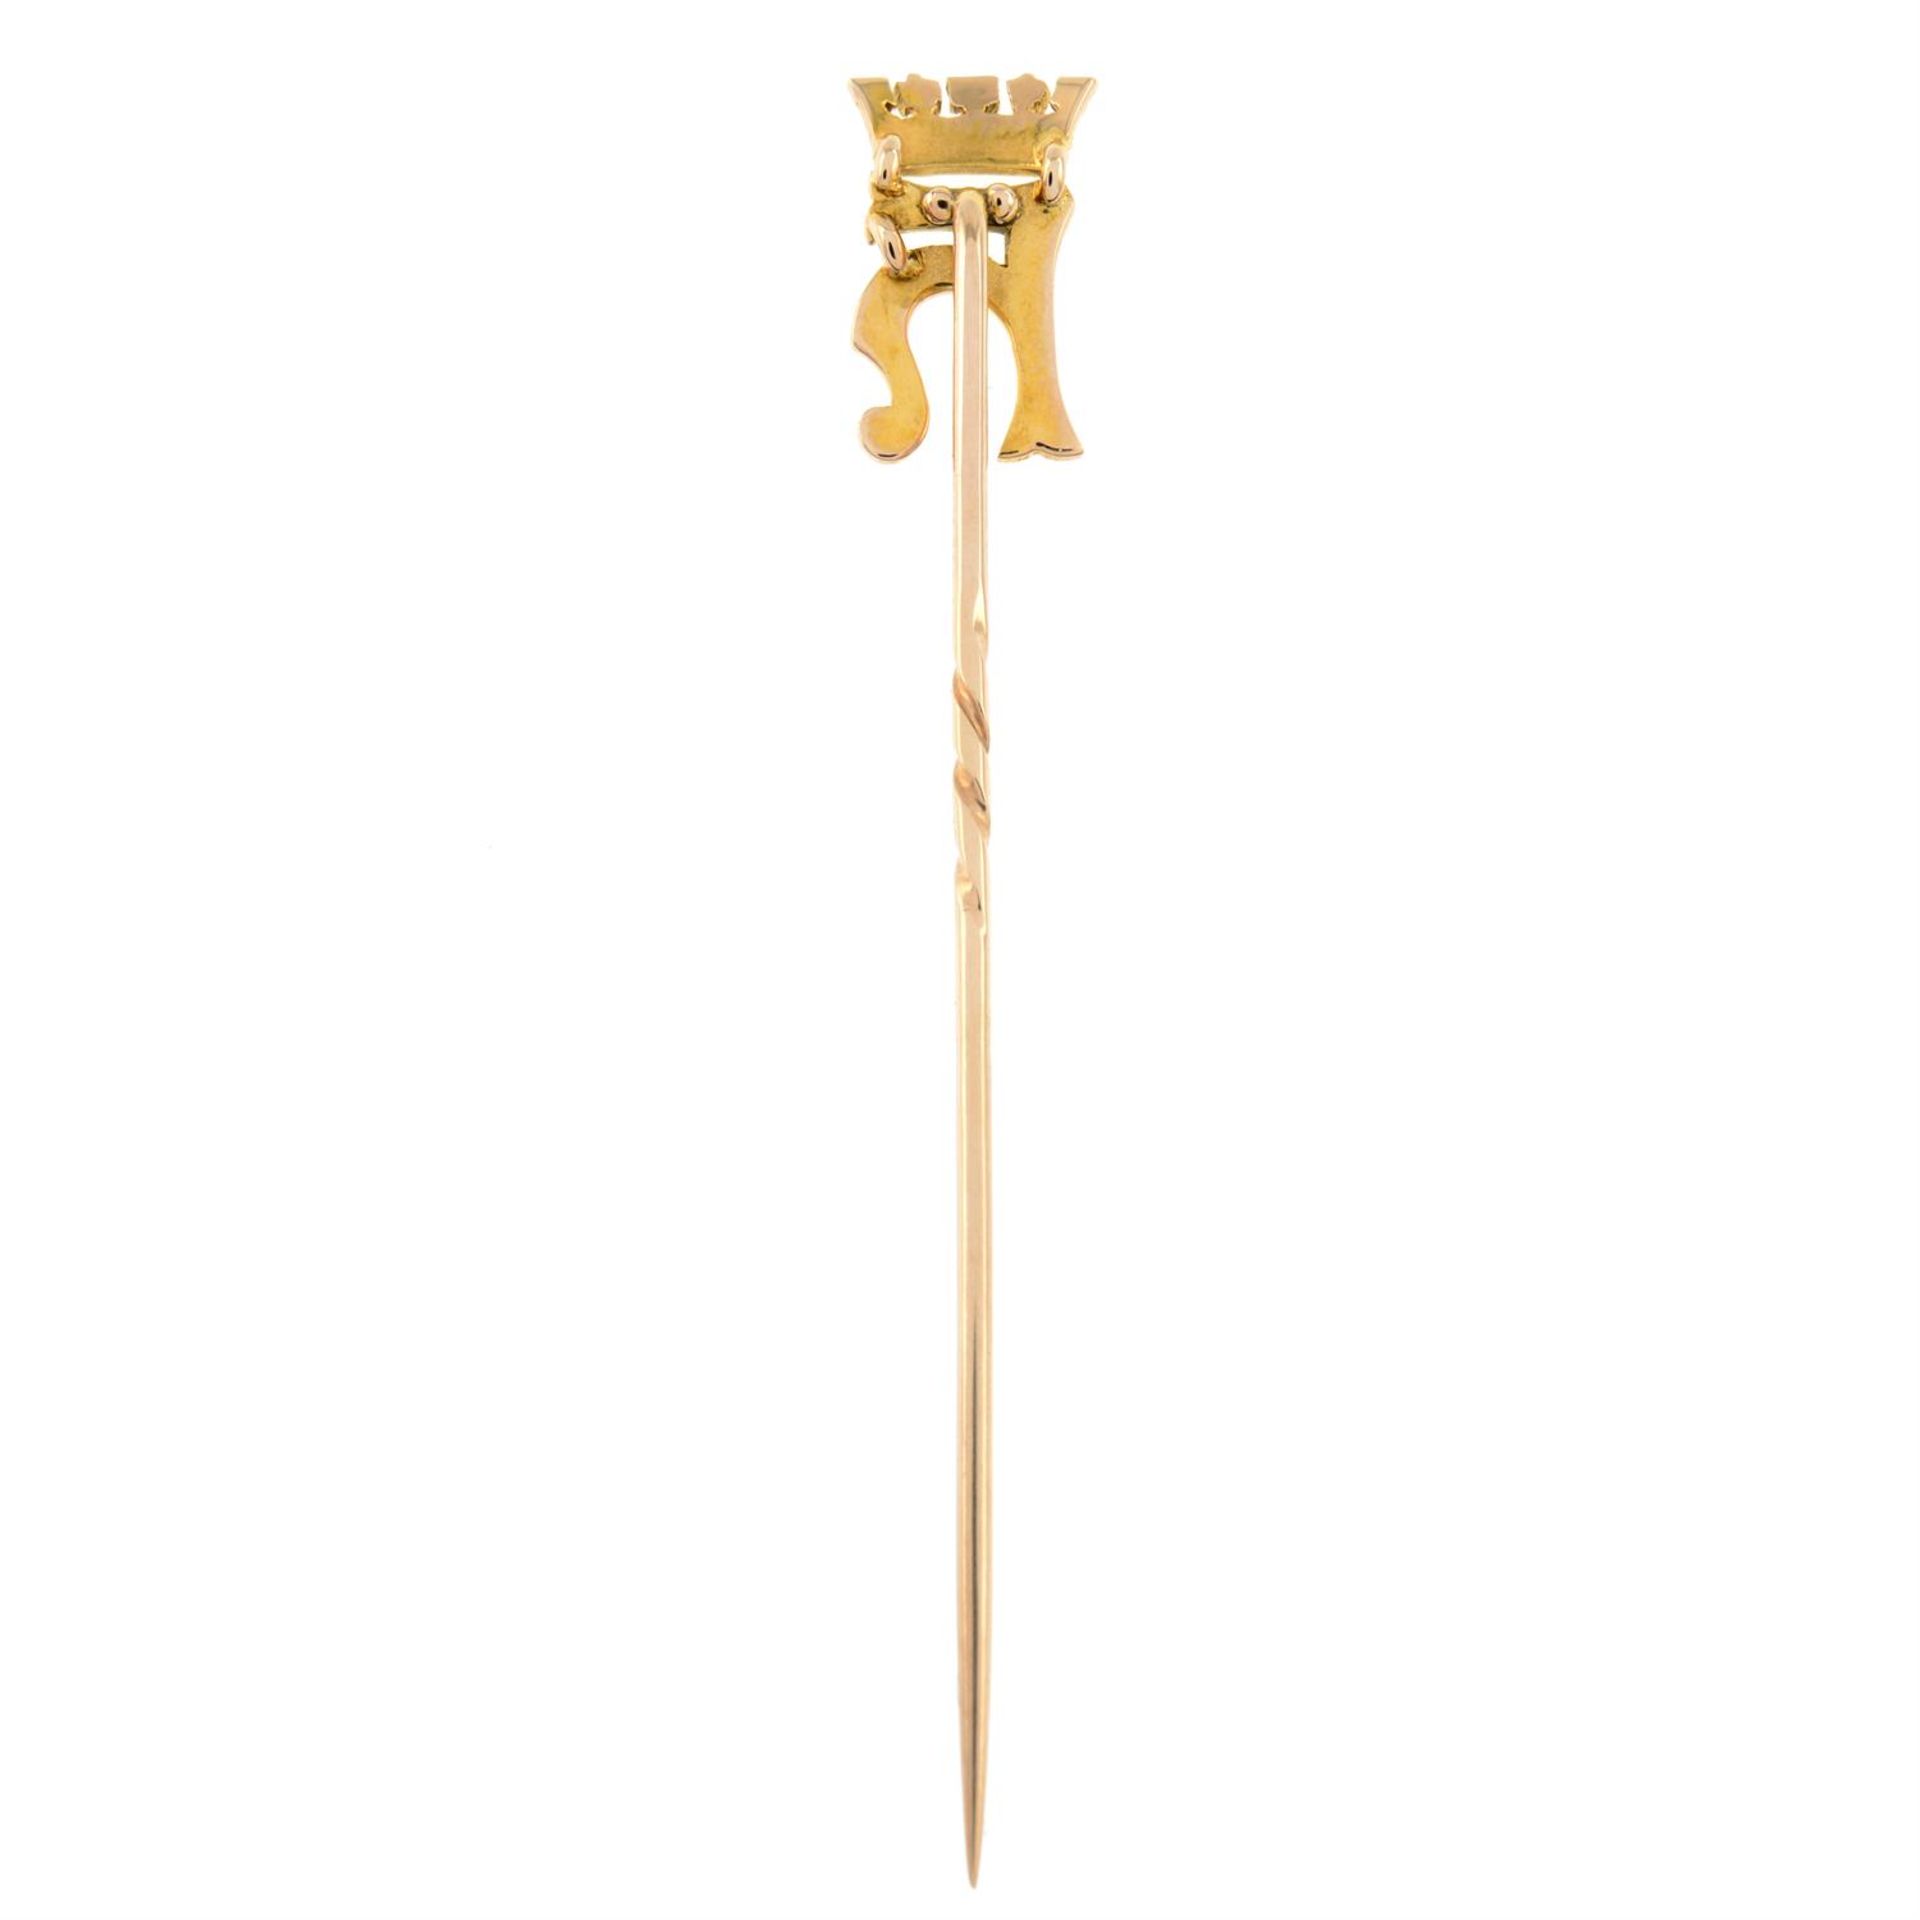 An early 20th century 15ct gold monogram stickpin for Princess Helen of Waldeck and Pyrmont, - Image 4 of 7